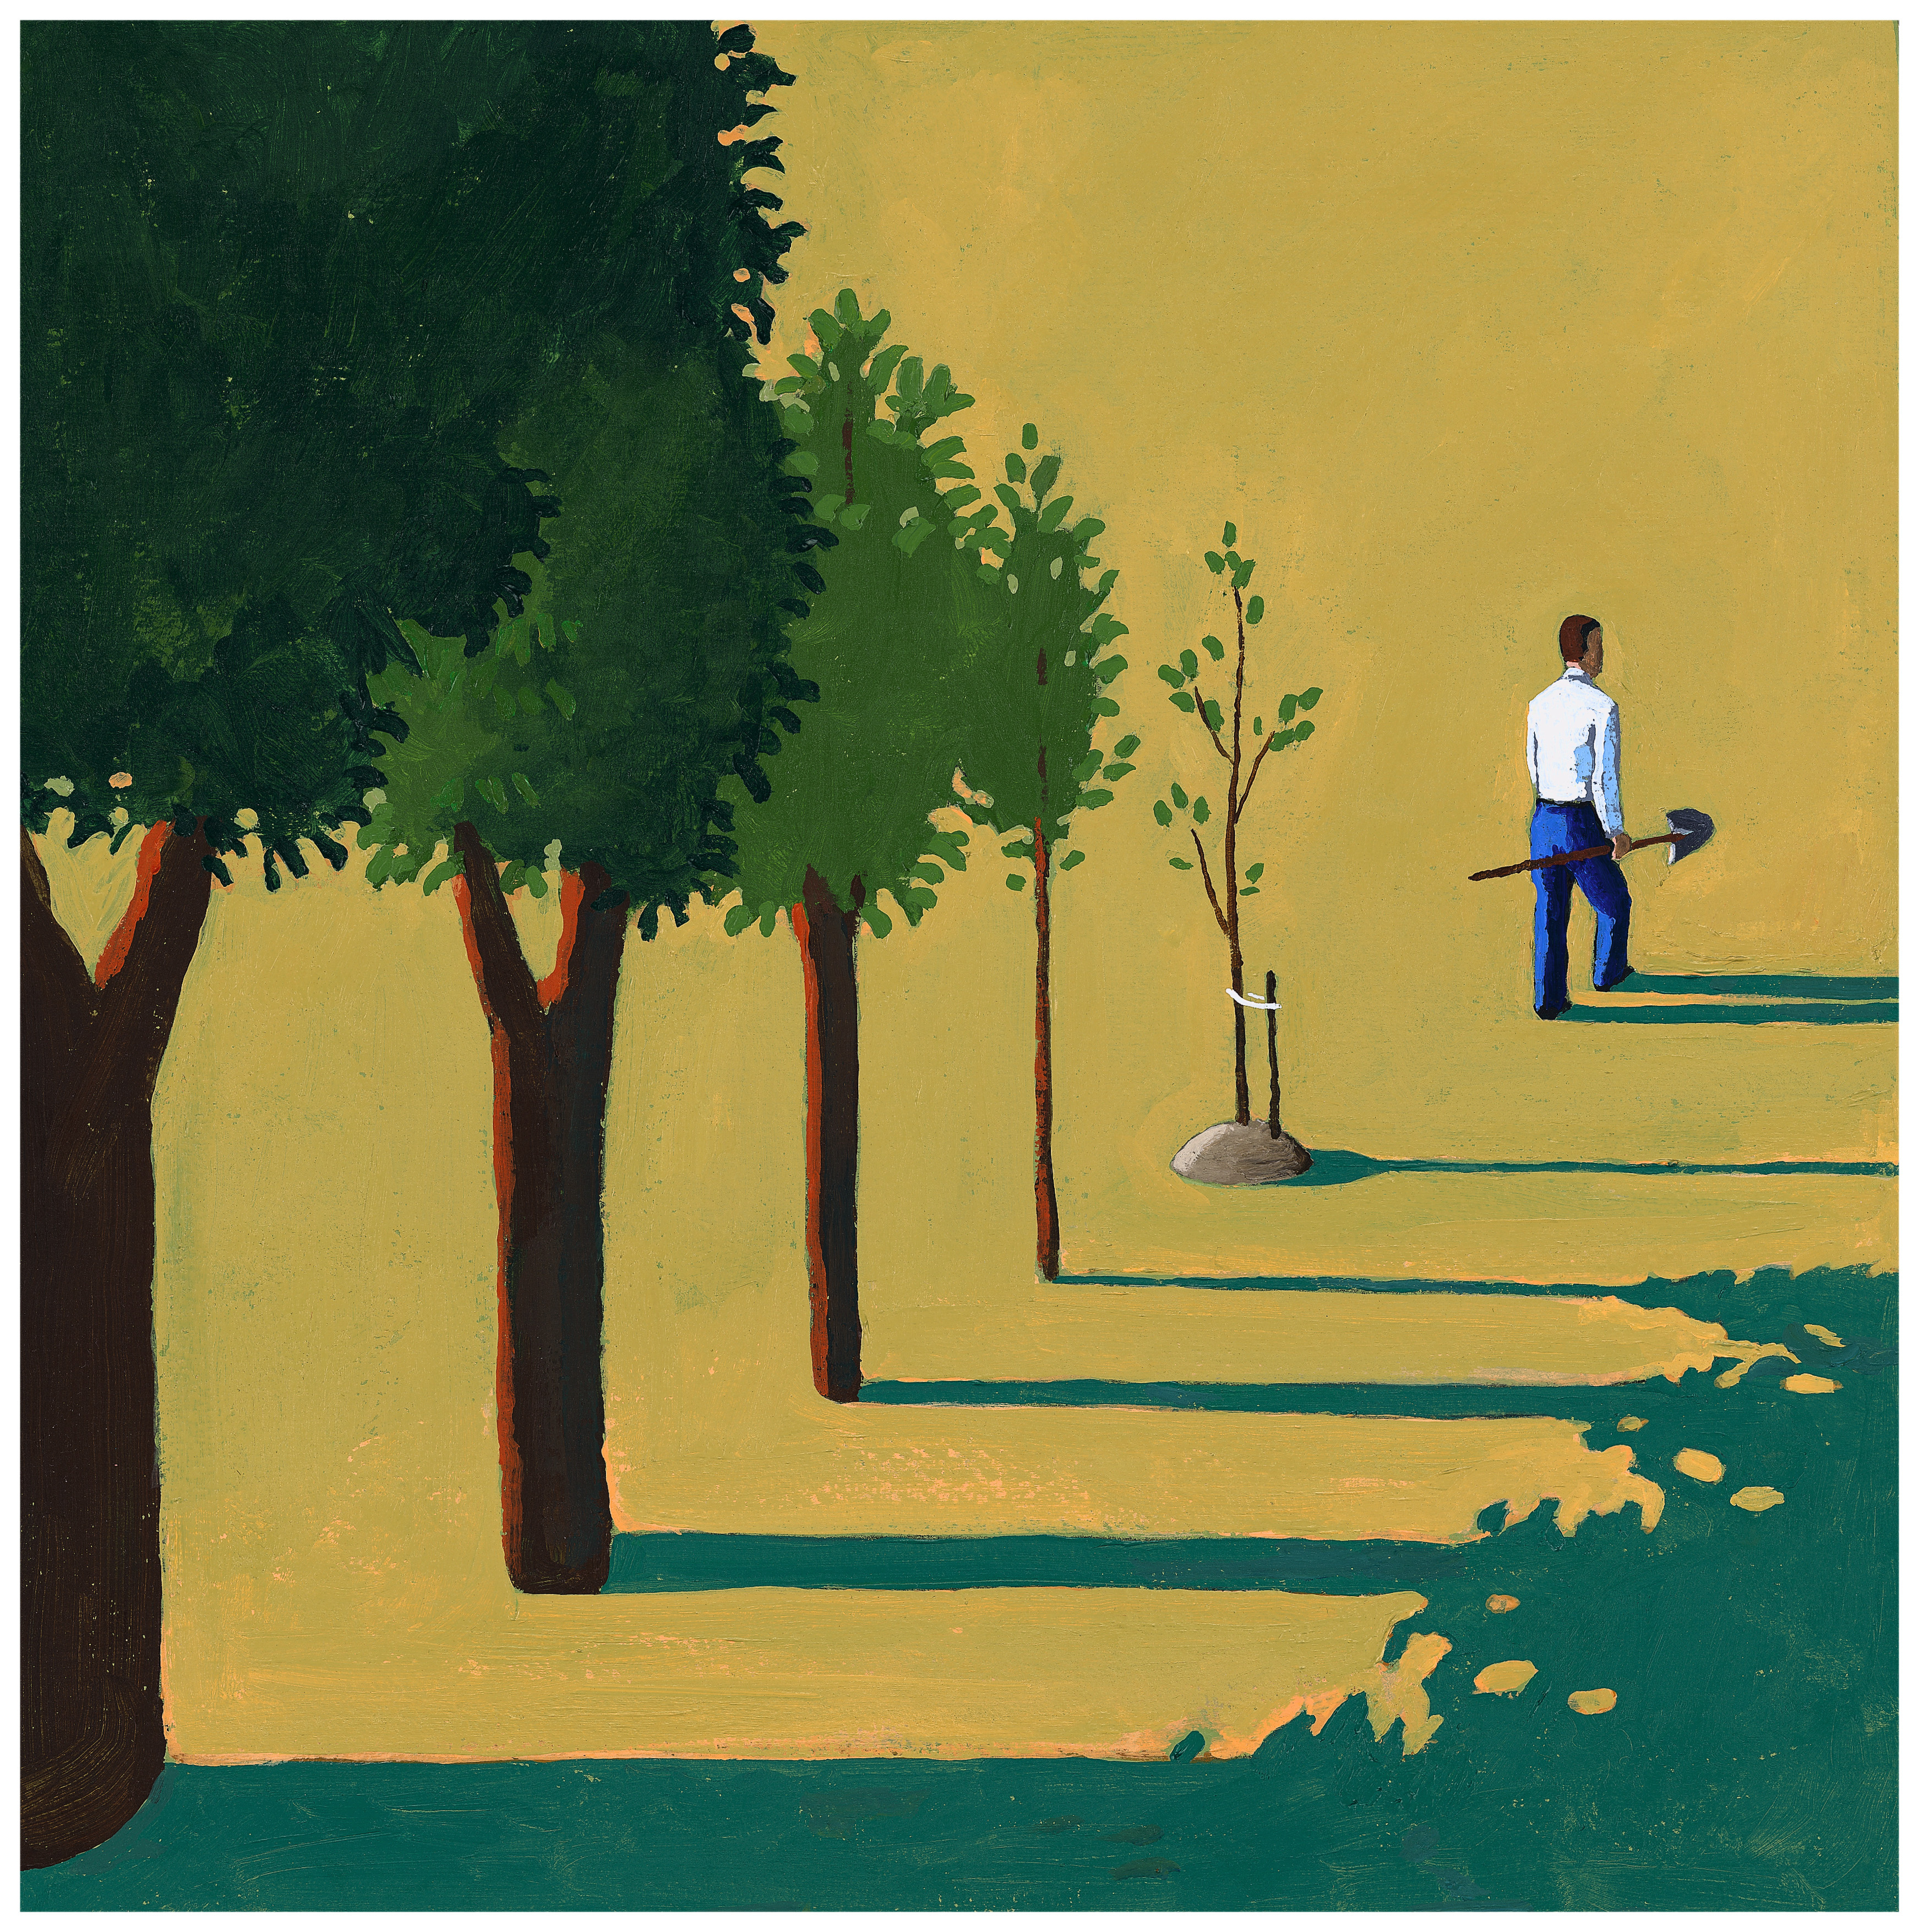 A drawing of a person holding a shovel and walking away from a row of recently planted trees.